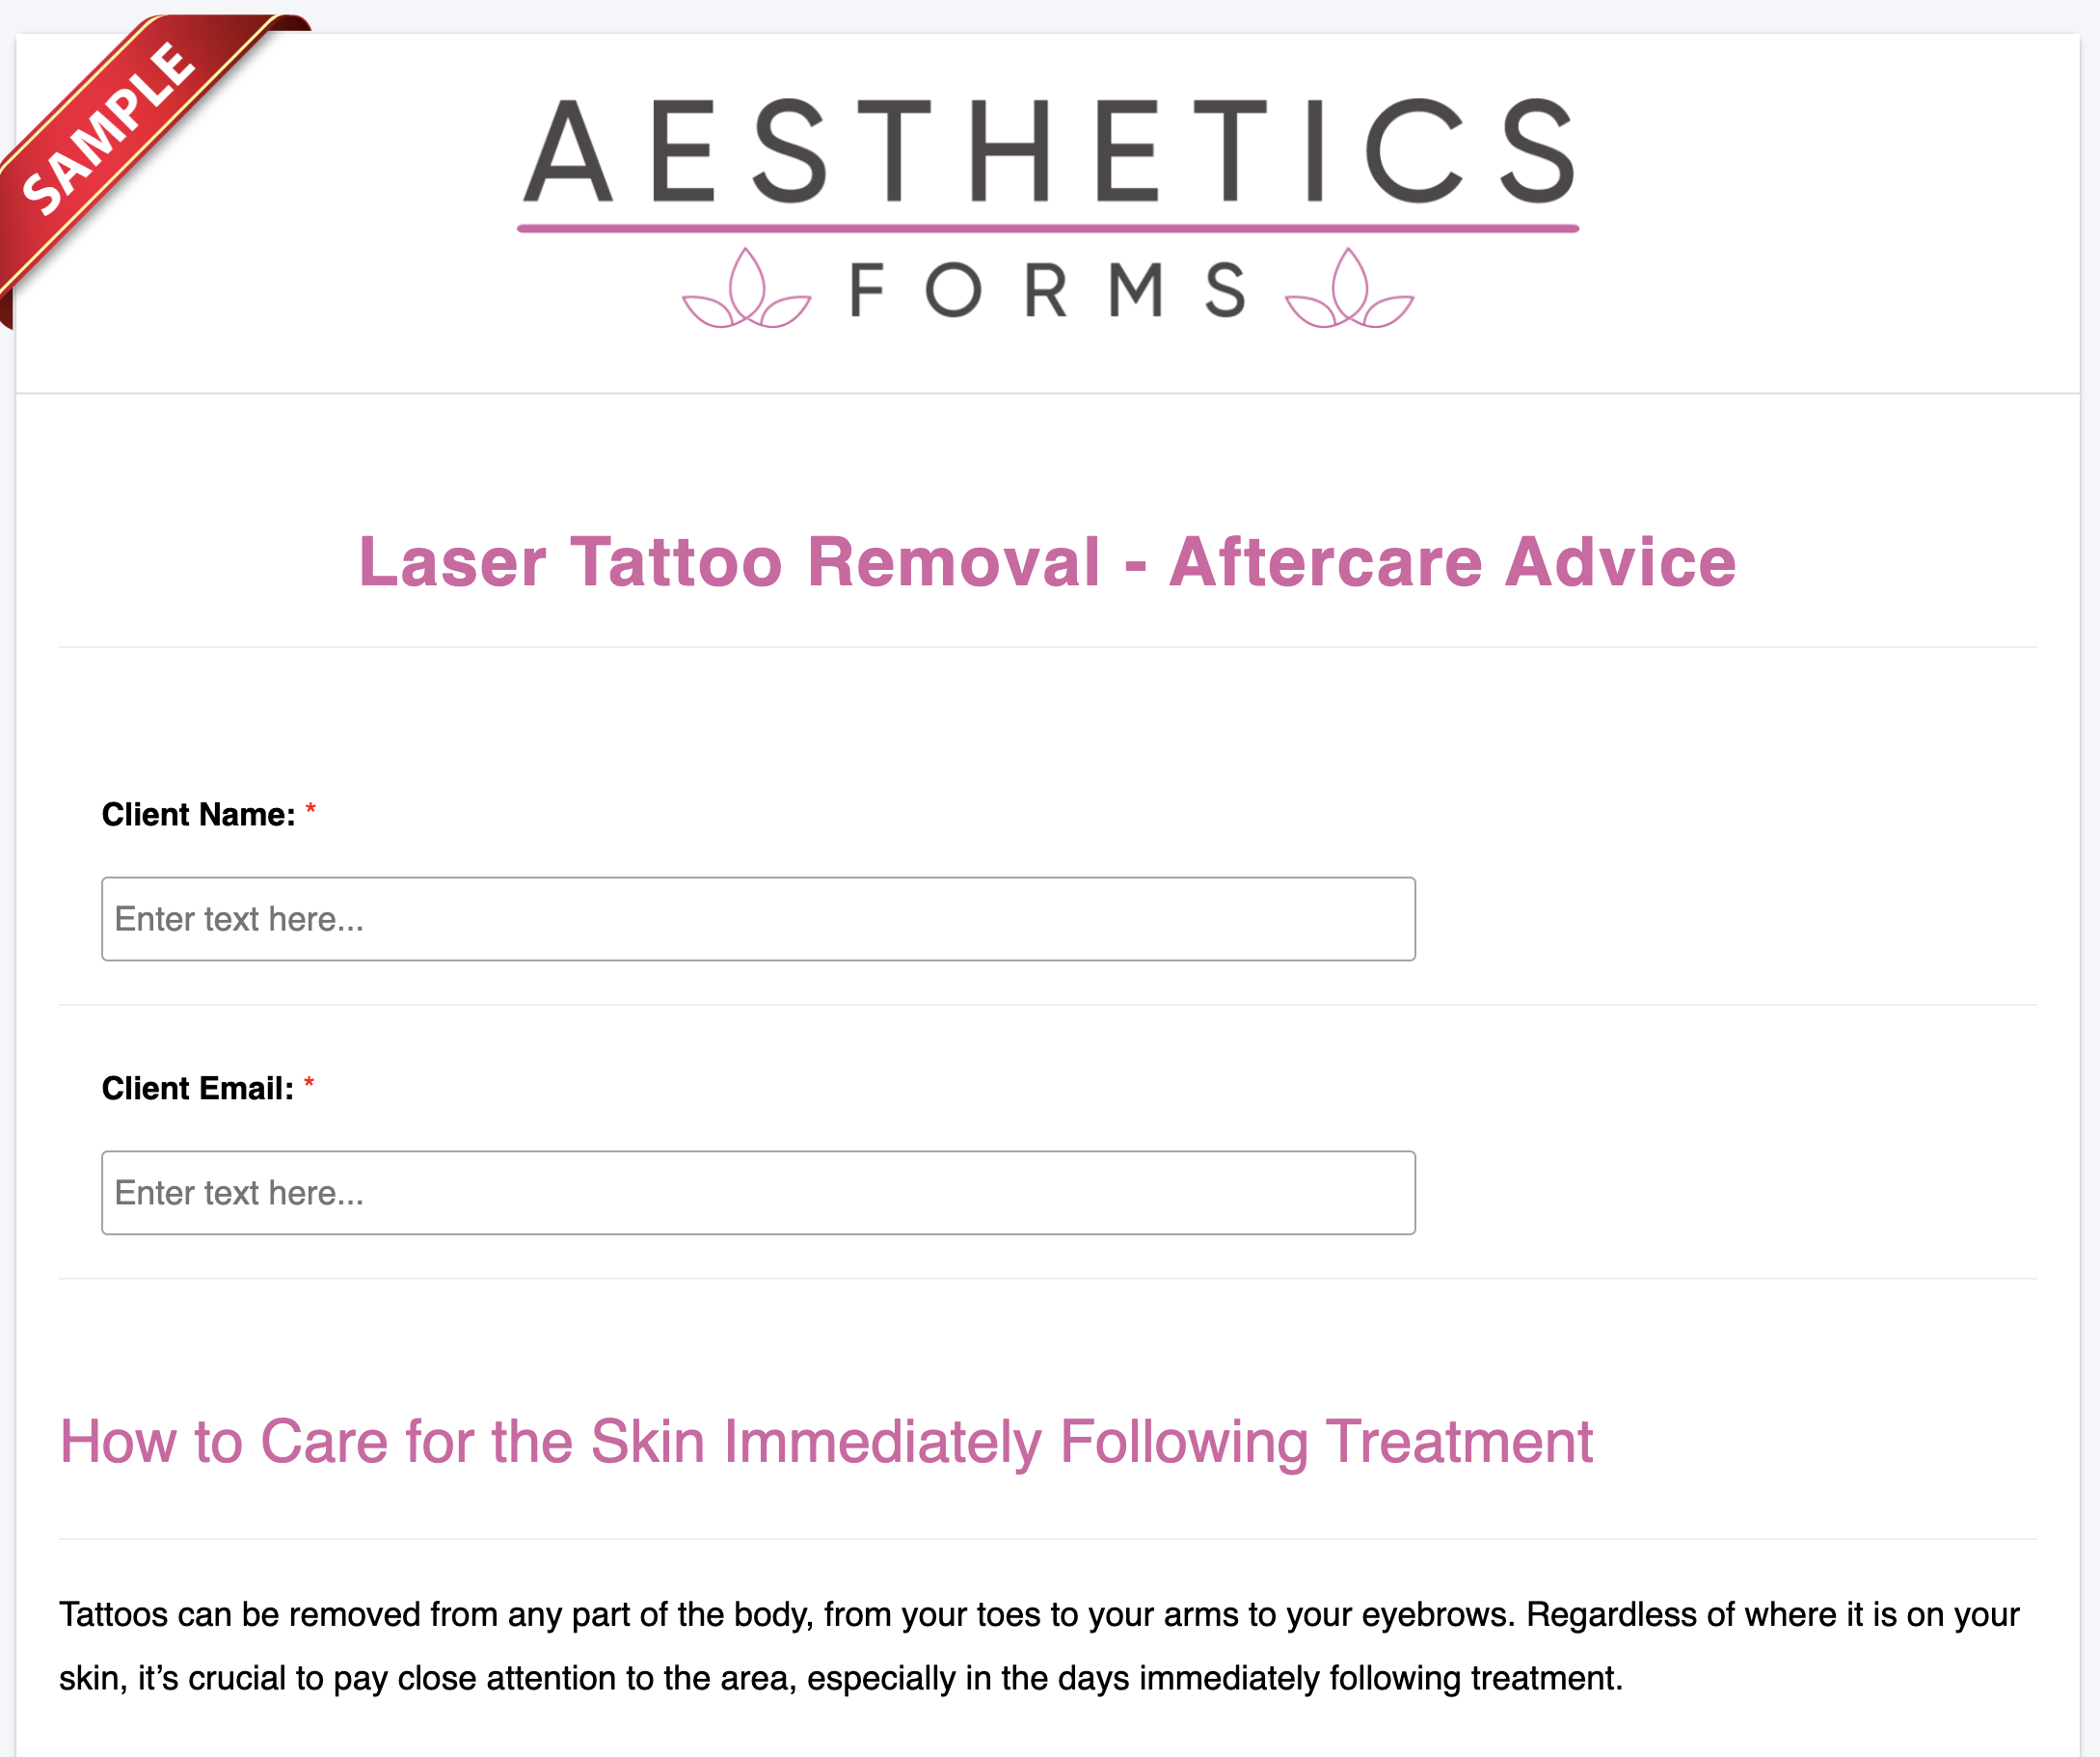 Laser Tattoo Removal Aftercare Form